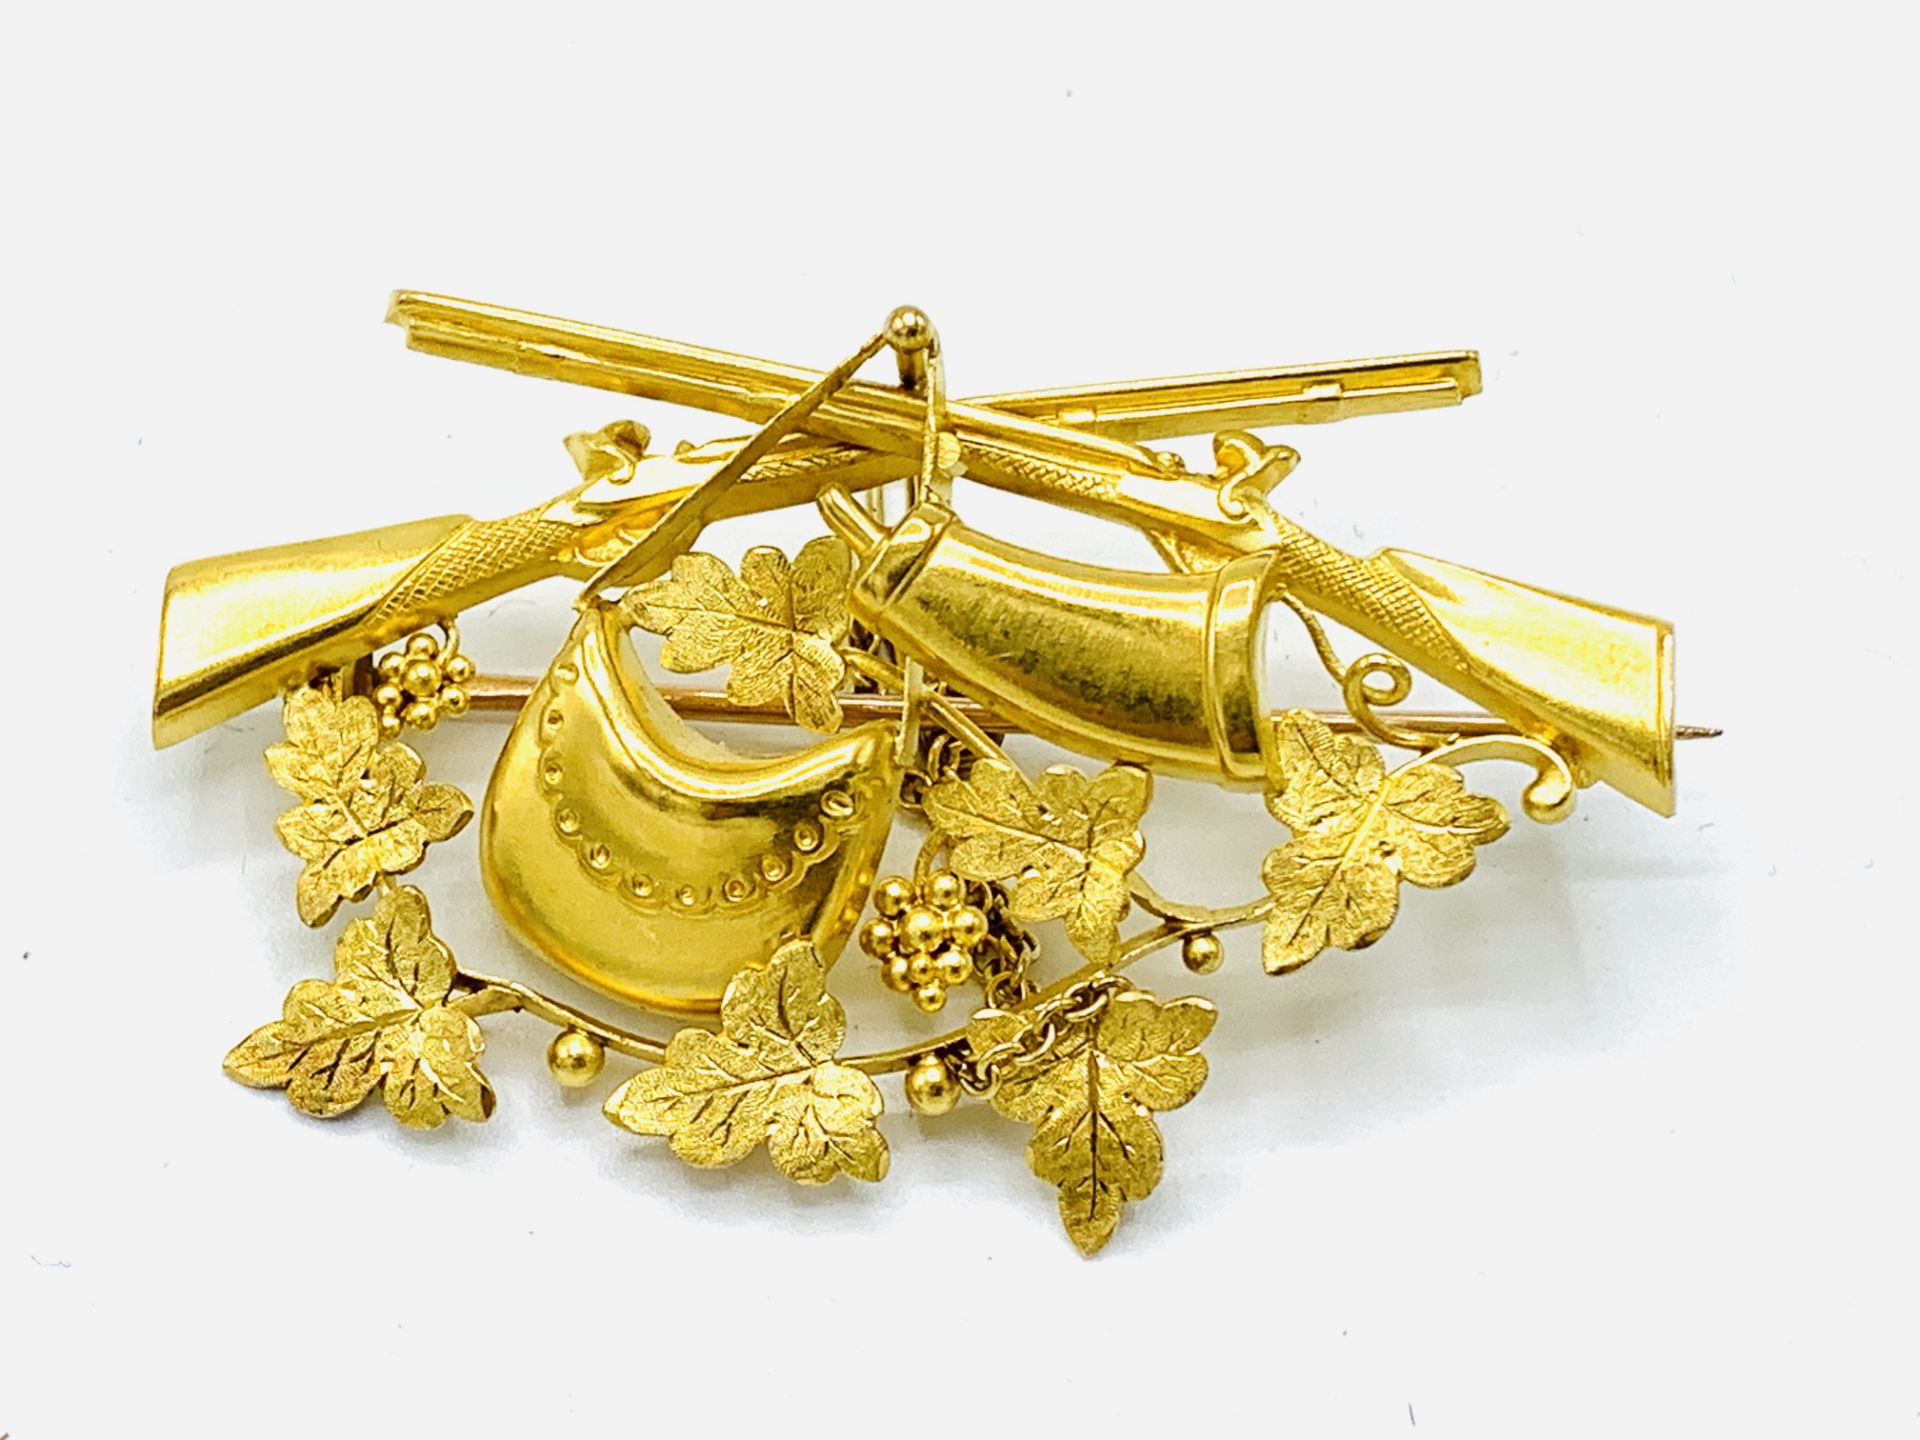 Gold Victorian hunting brooch in the Etruscan style